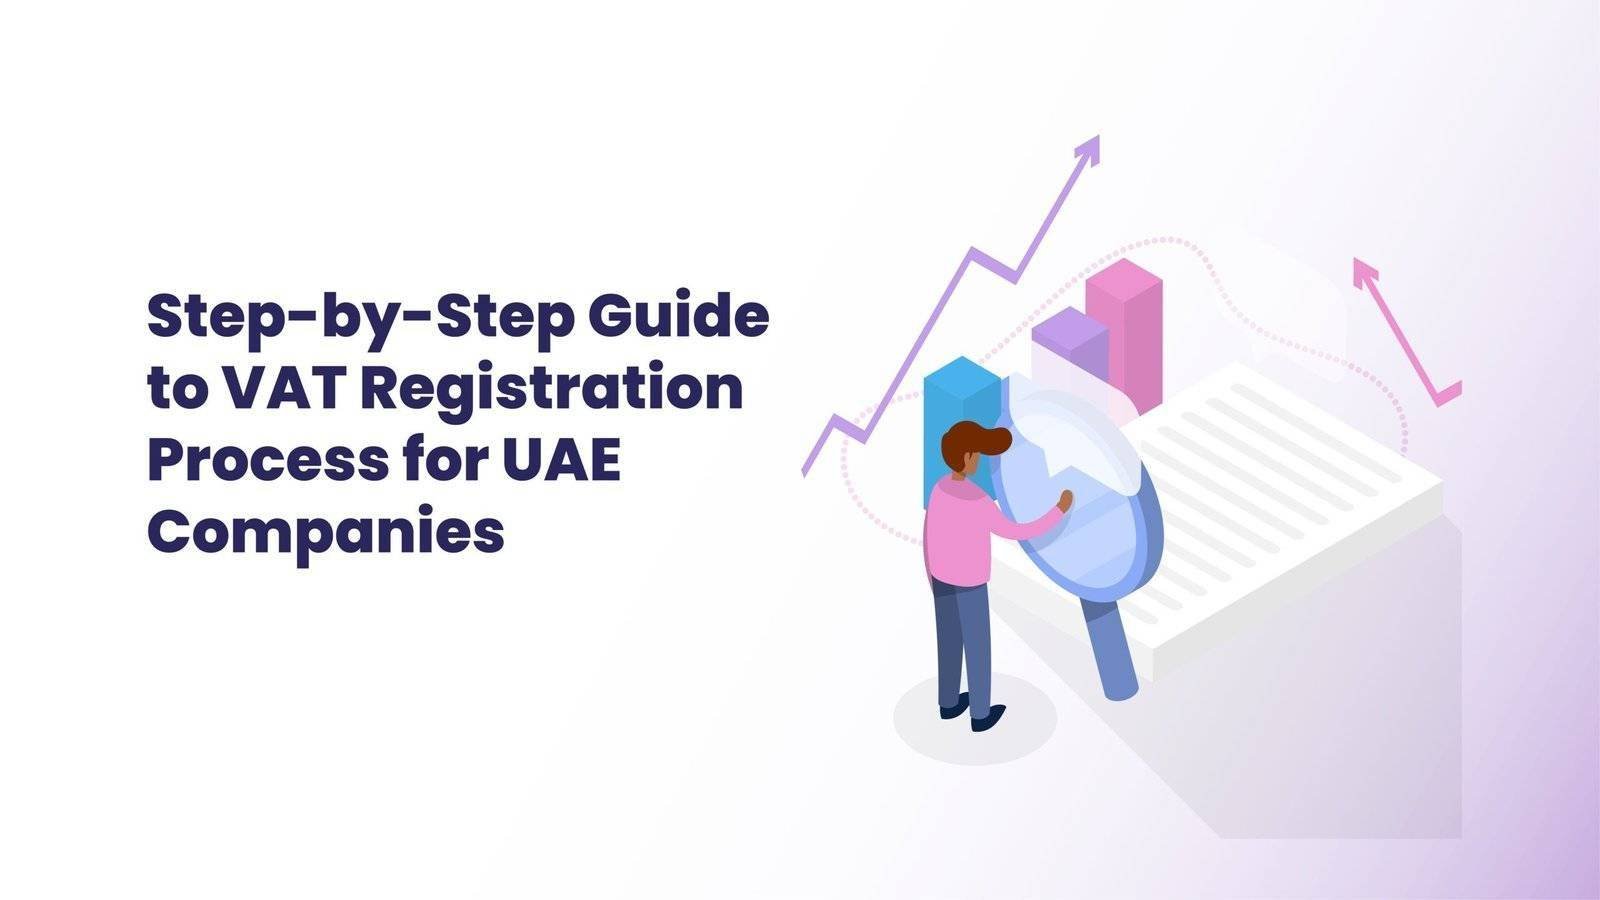 Step-by-Step Guide to VAT Registration Process for UAE Companies